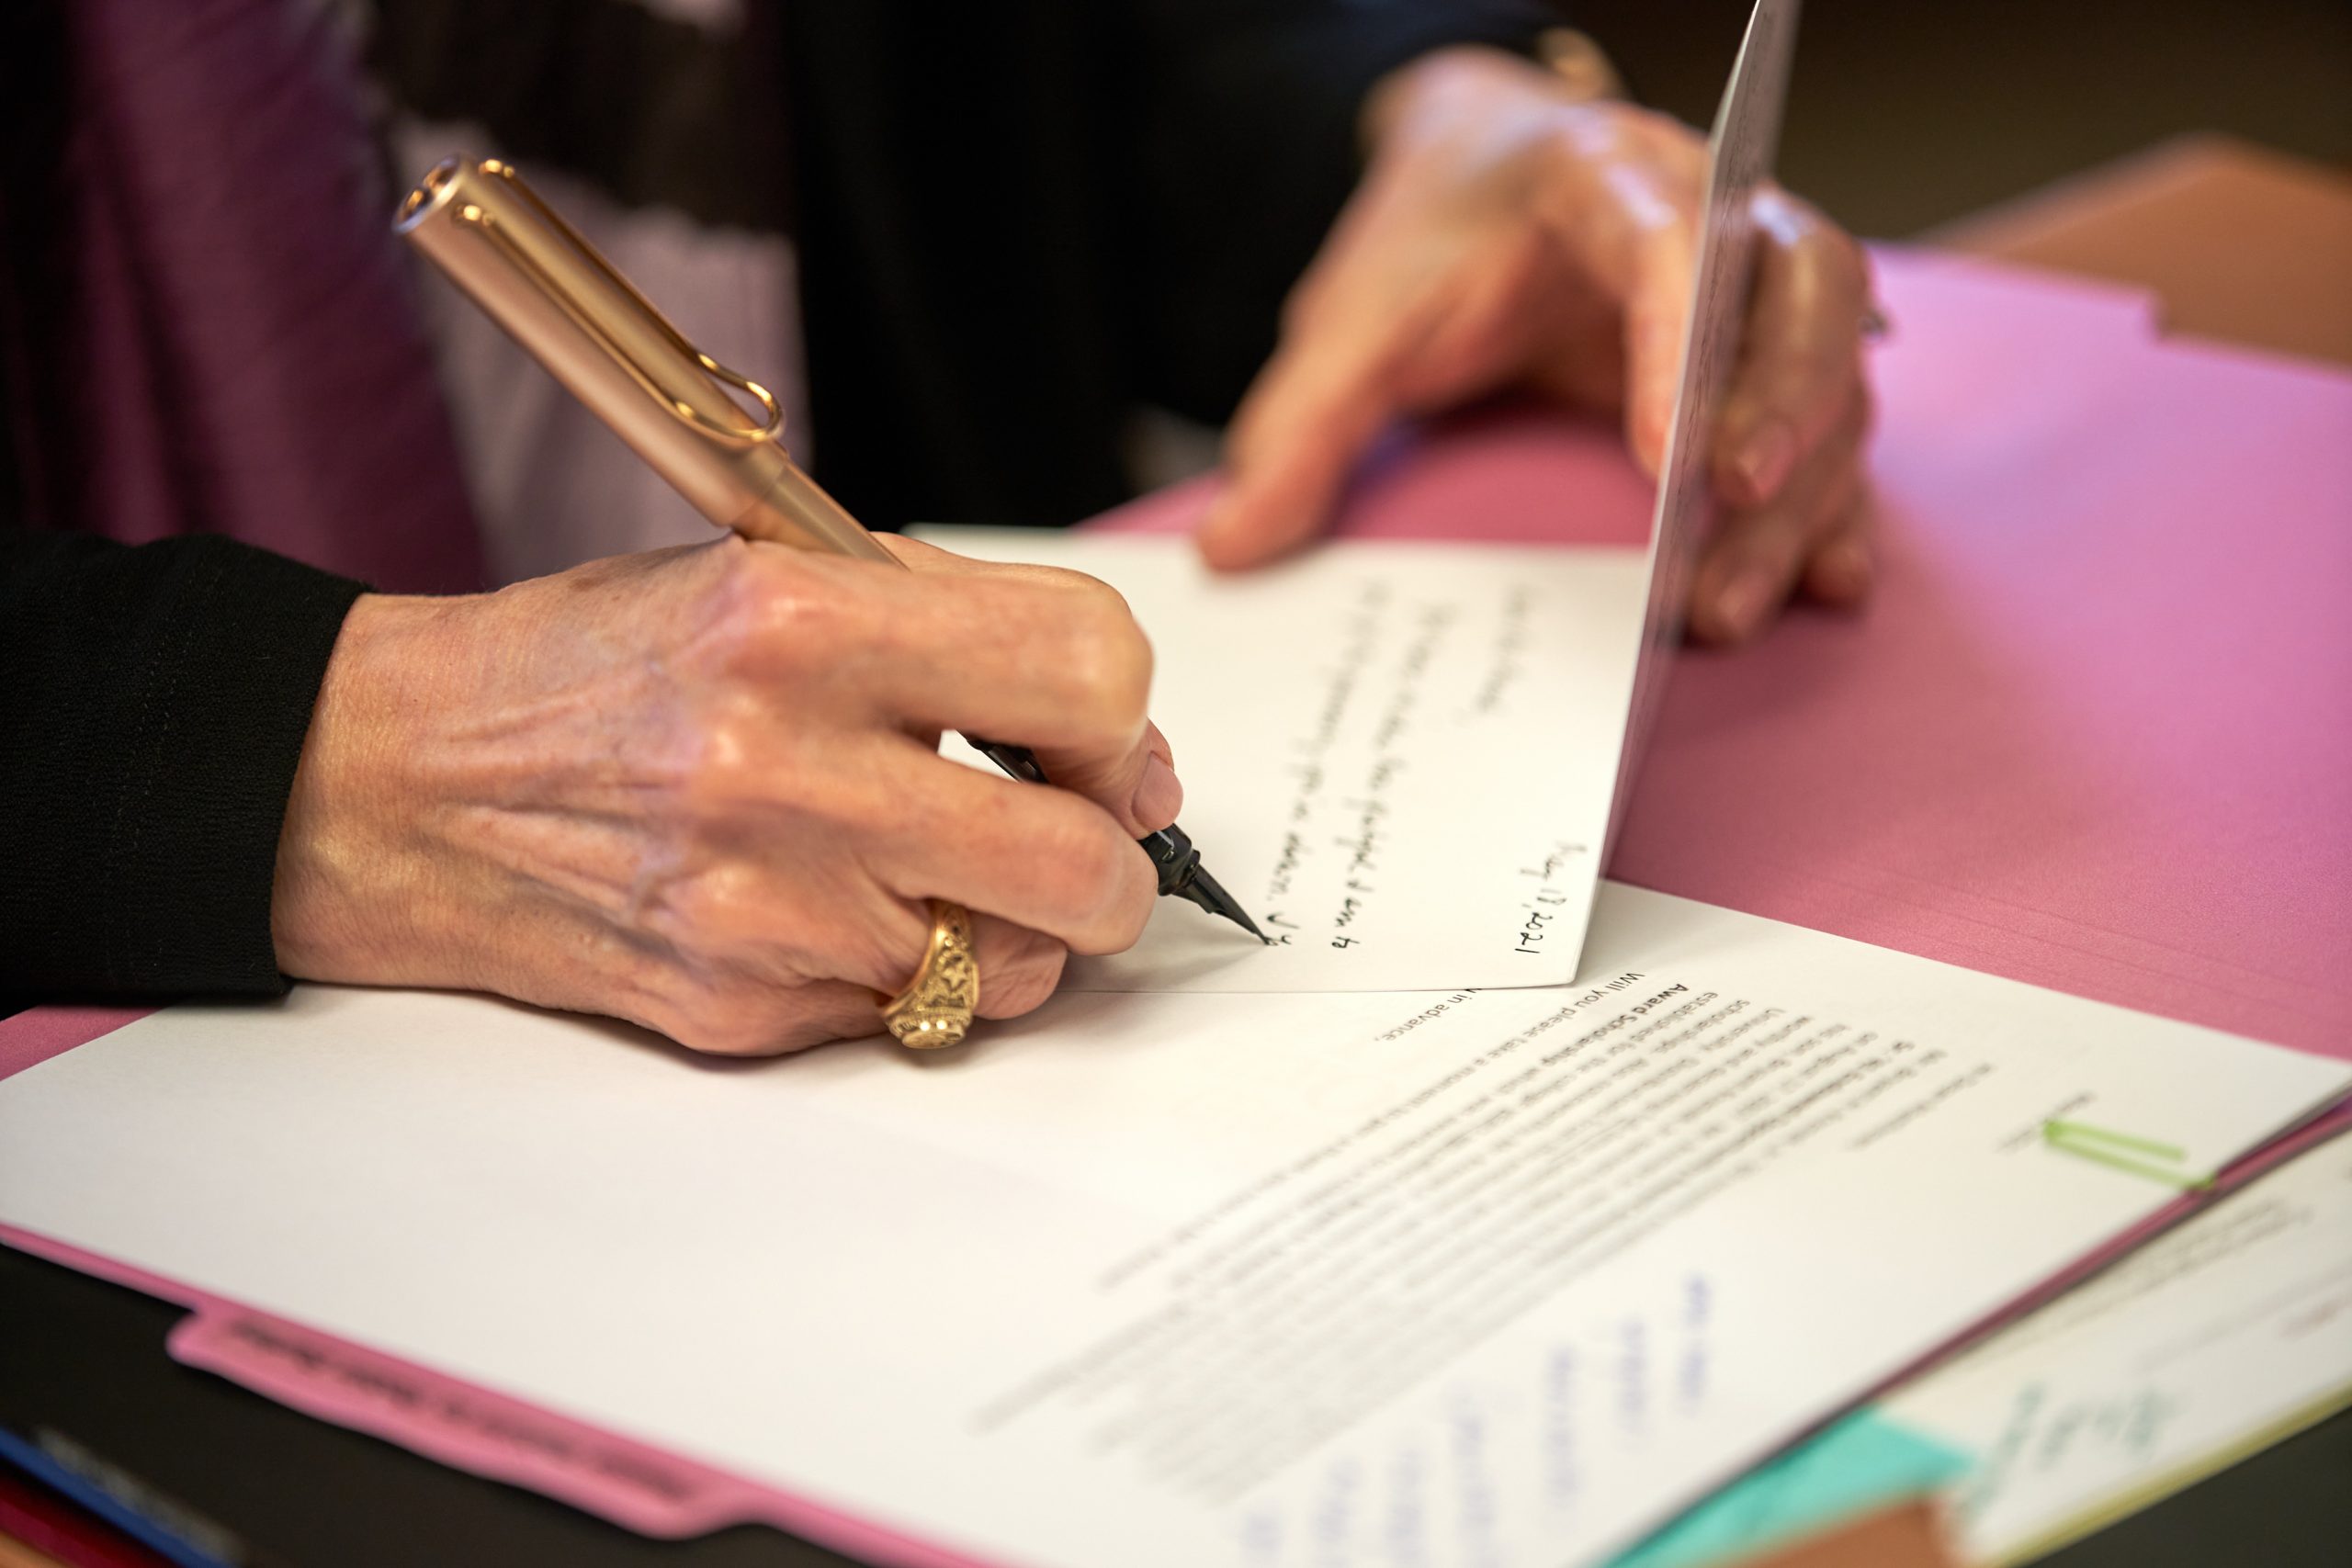 Close up photo of Dean Matthews hands writing a note with a fountain pen. Her Aggie ring is visible as she glides the pen across the page.